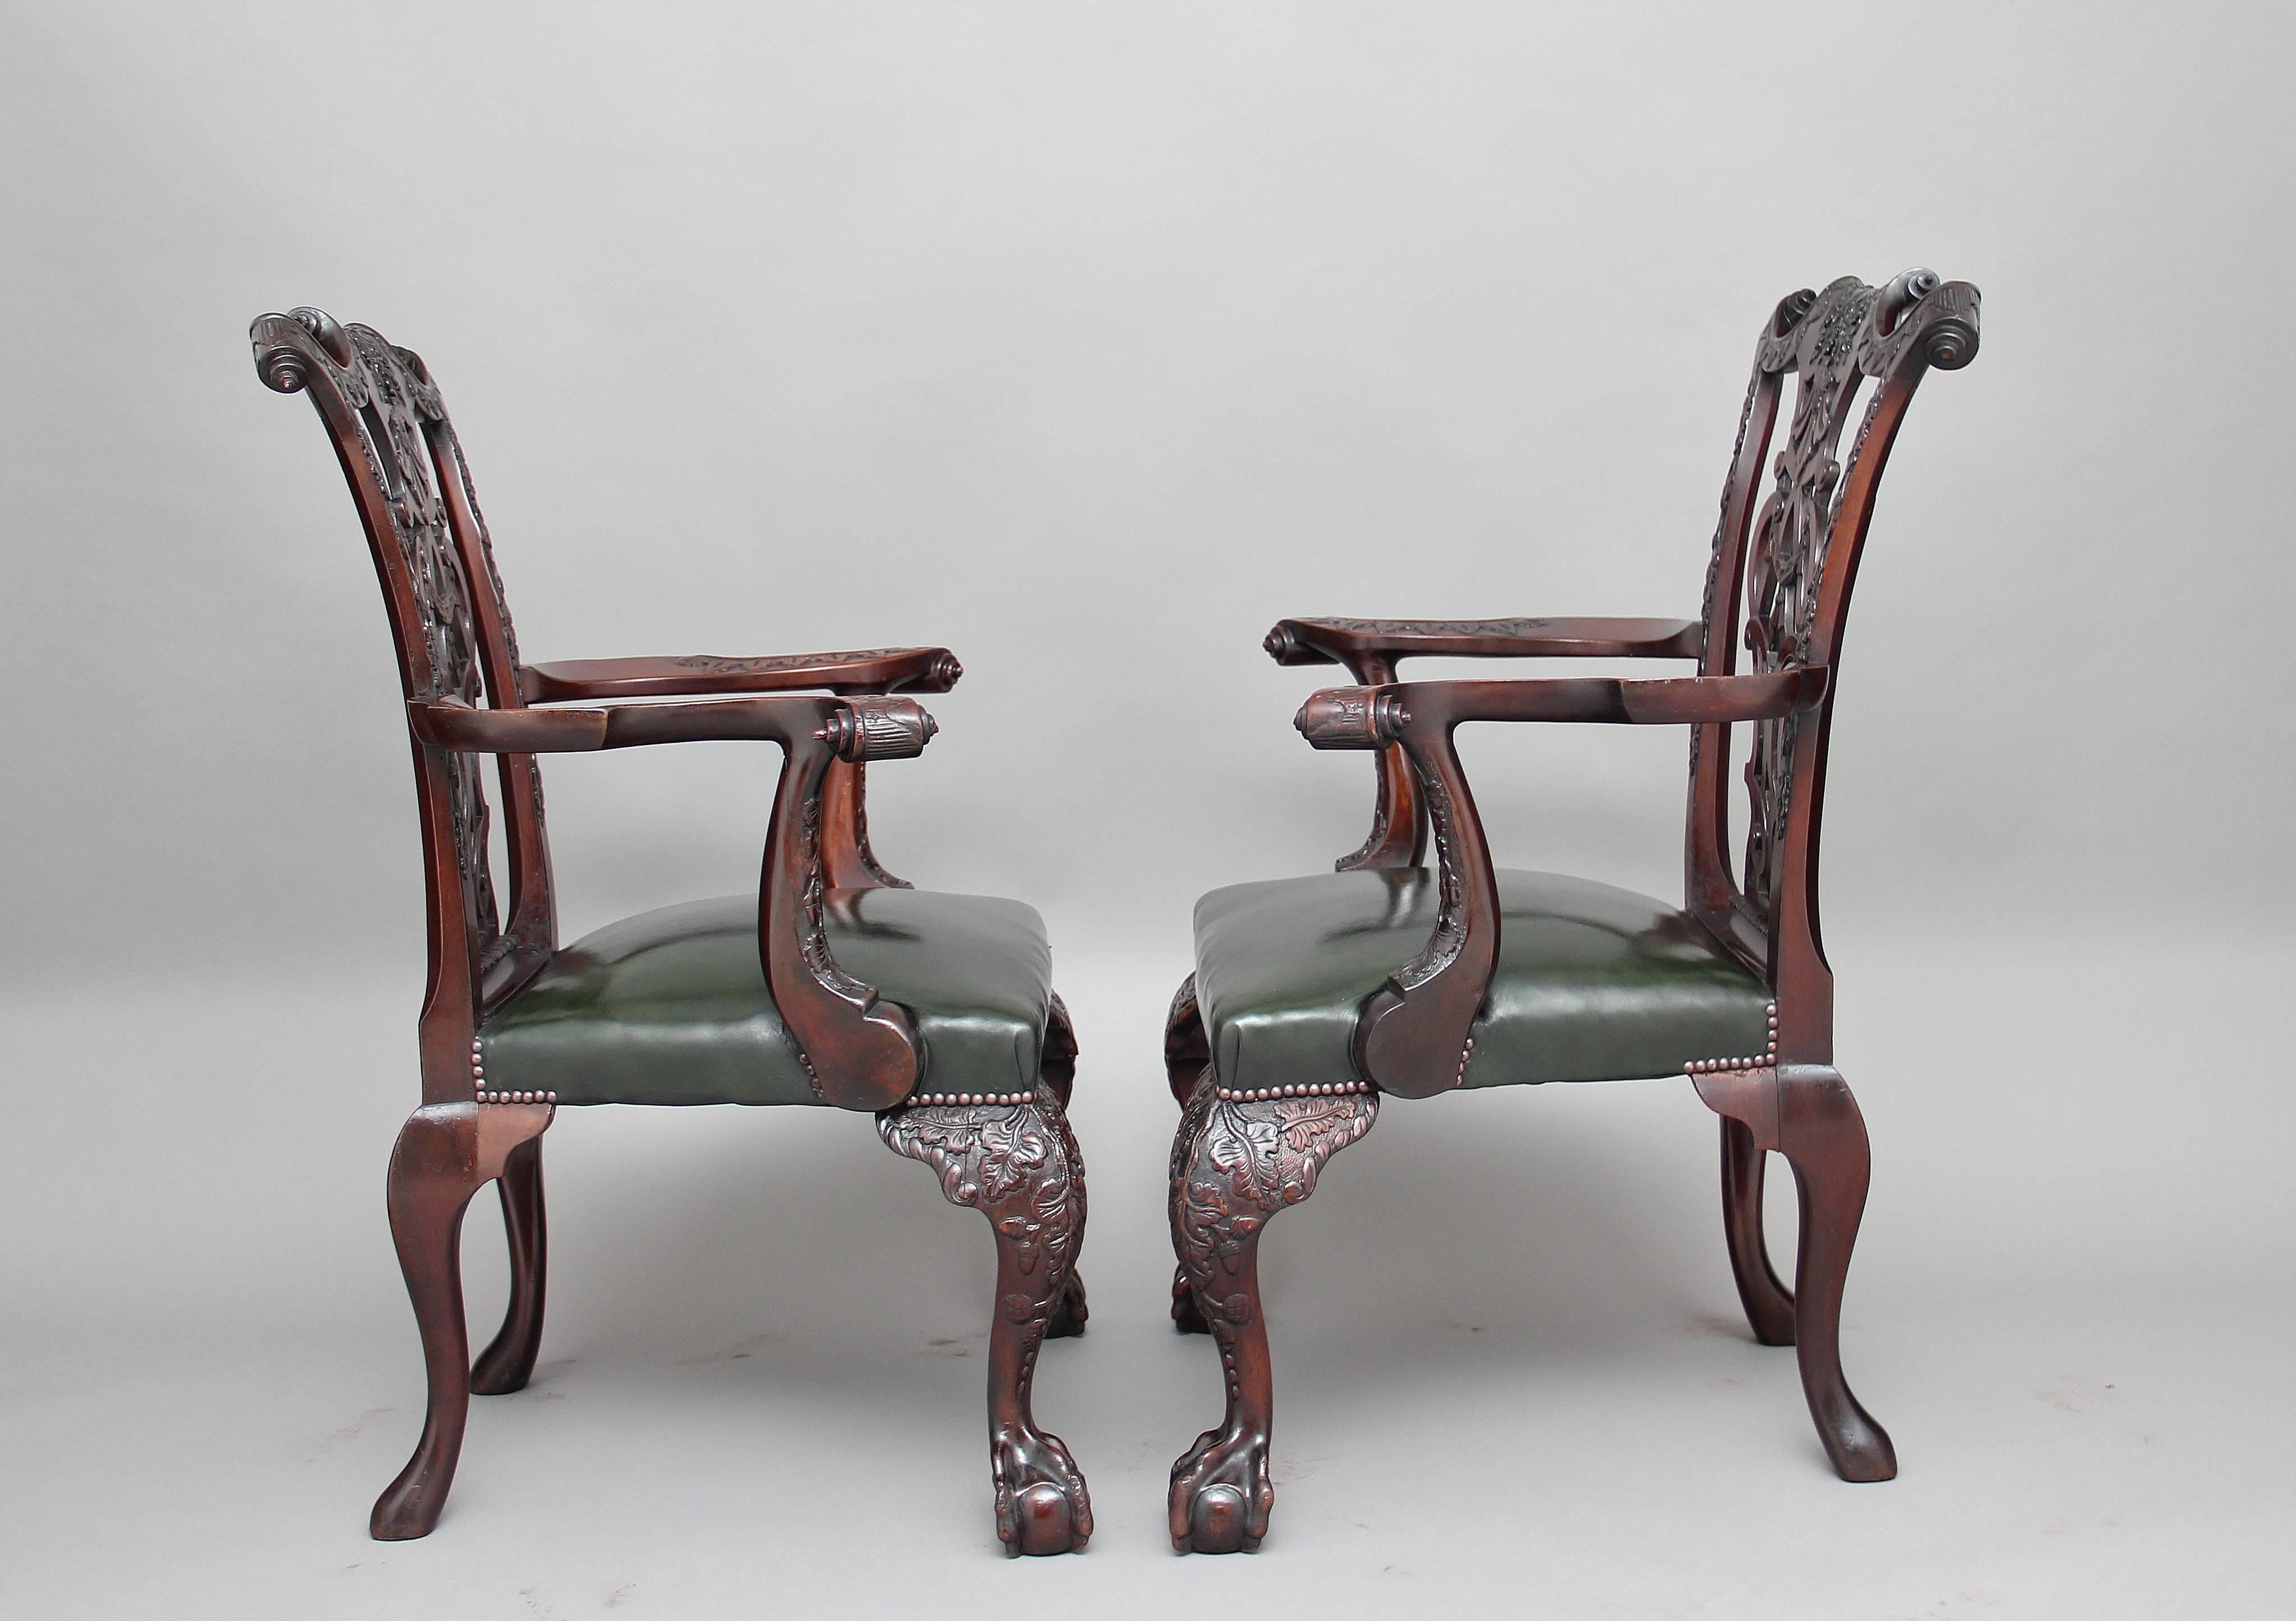 A remarkable pair of 19th century profusely carved mahogany armchairs in the Chippendale style, superb quality and lovely dense timber, the carved supports decorated with acorns and flower foliage and having craved scrolls at the top either side, at